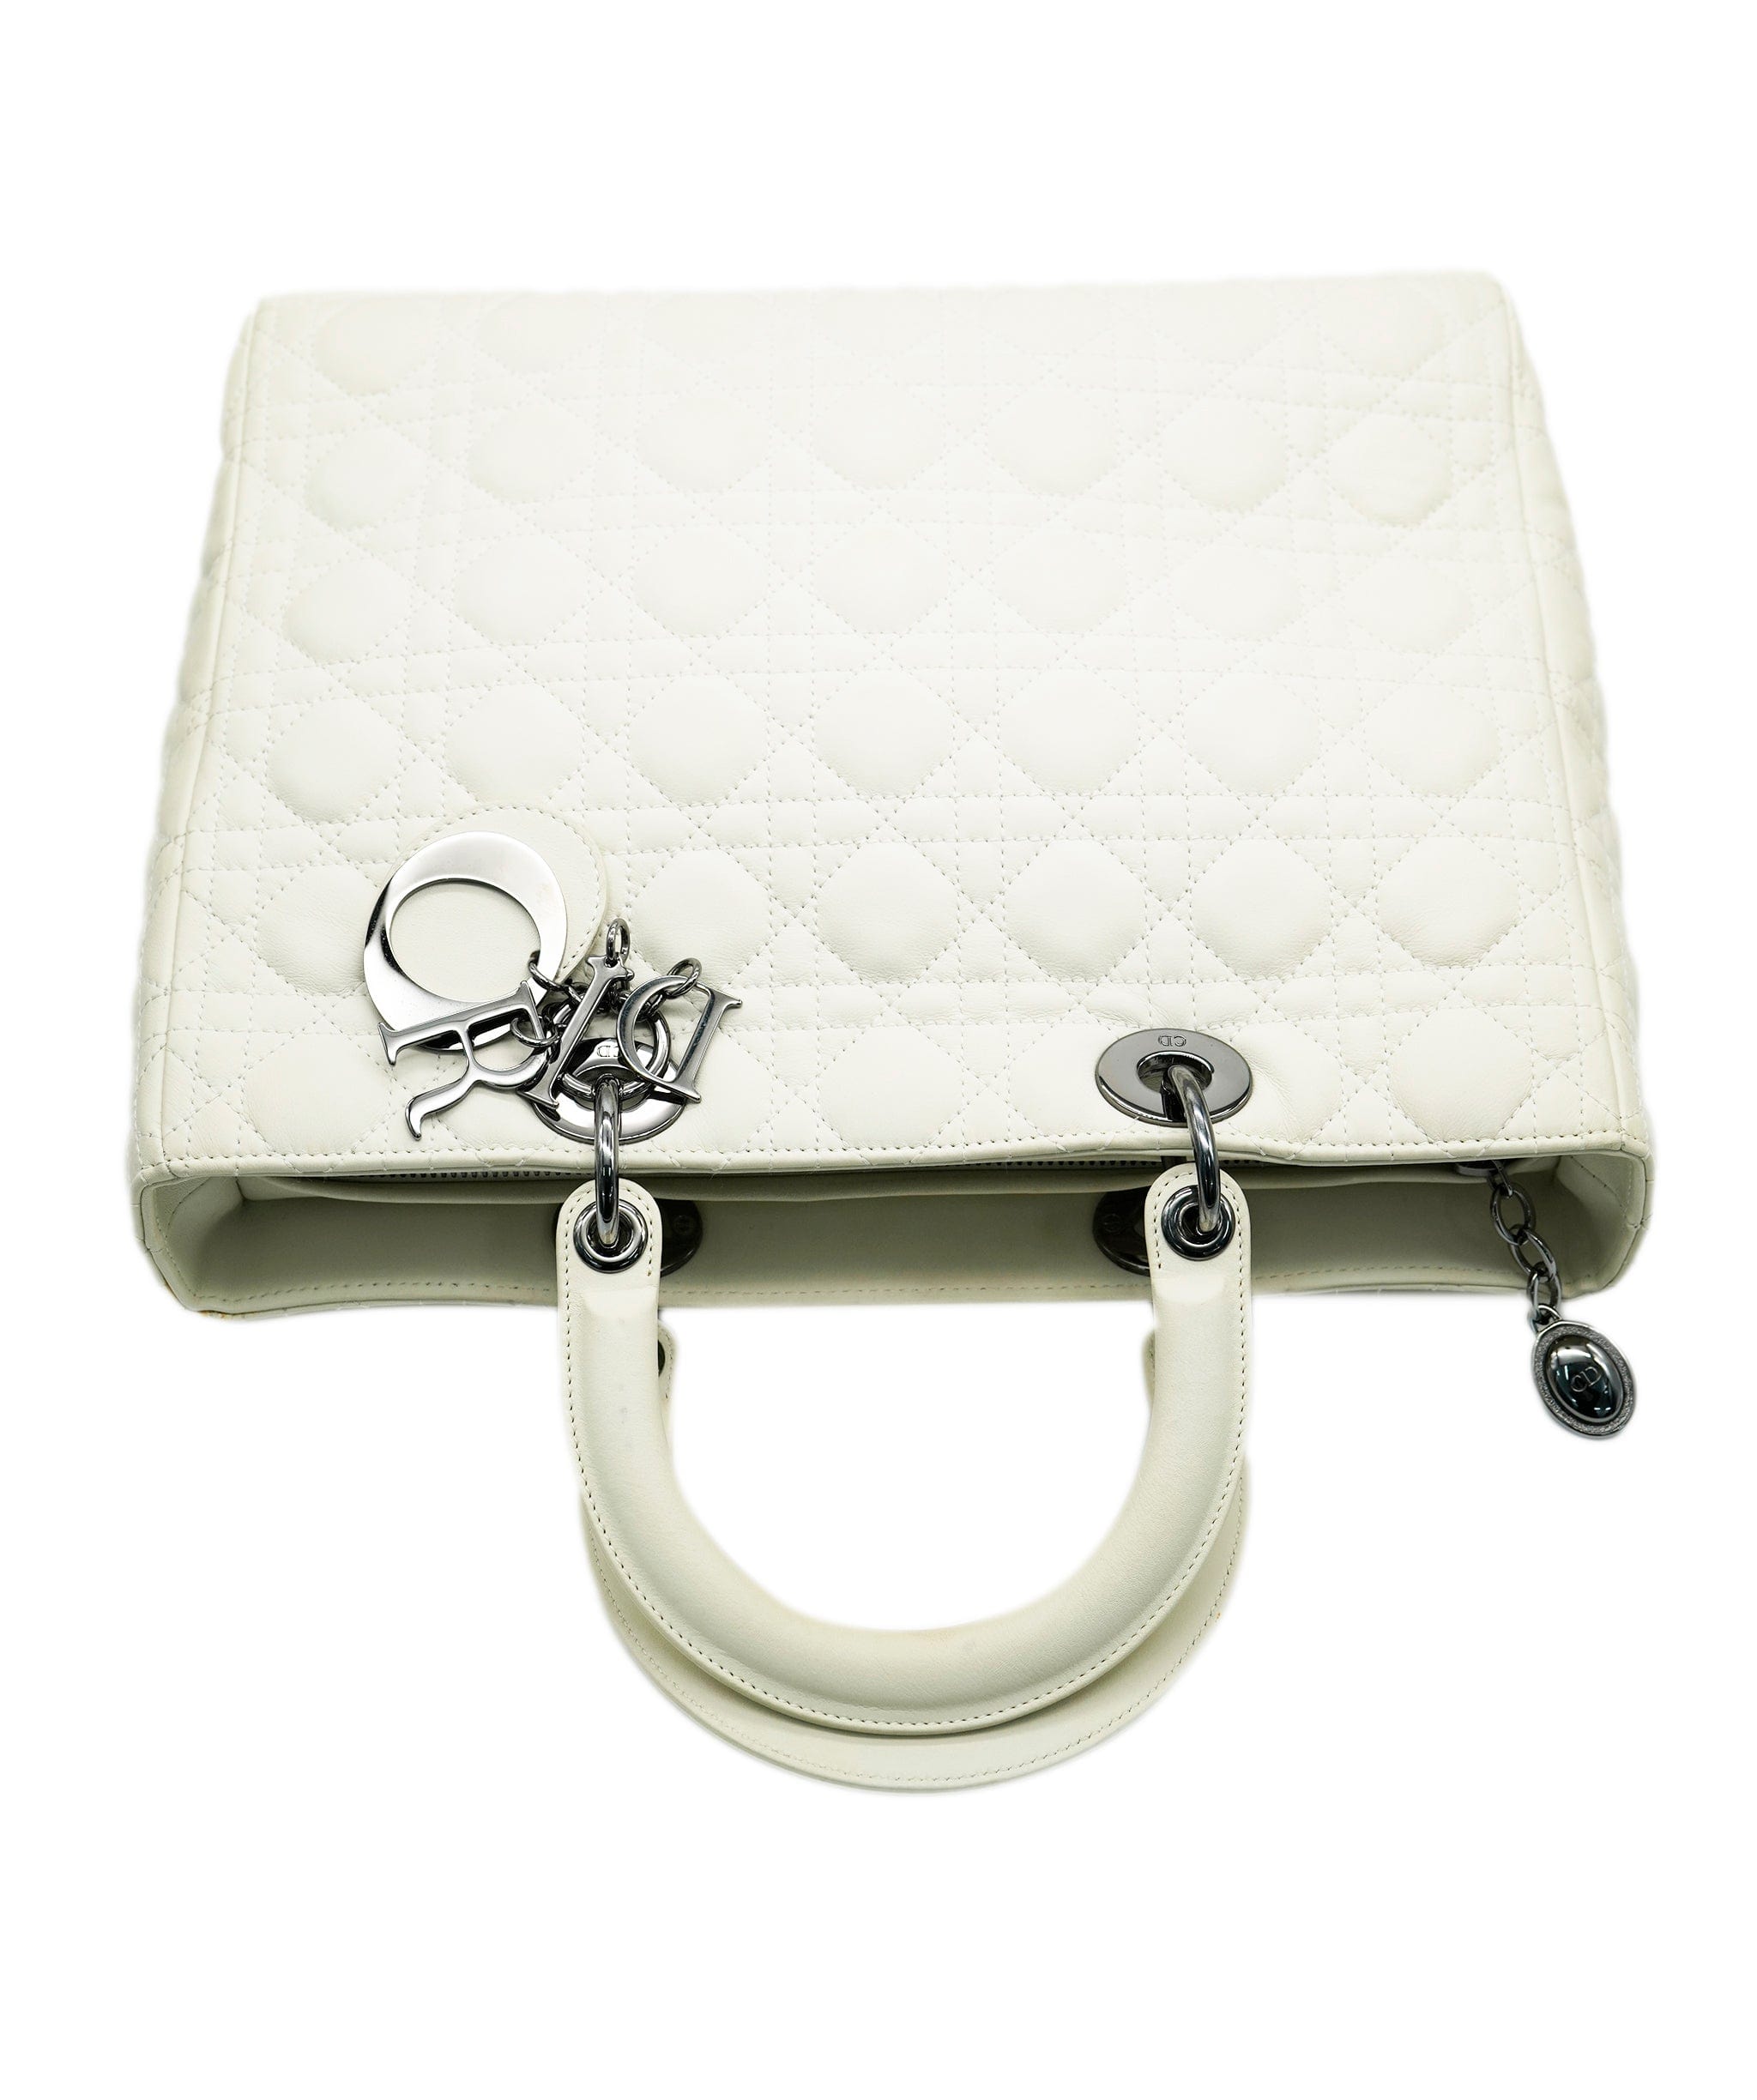 Christian Dior Lady Dior Large White with Grey Hardware ALC1043